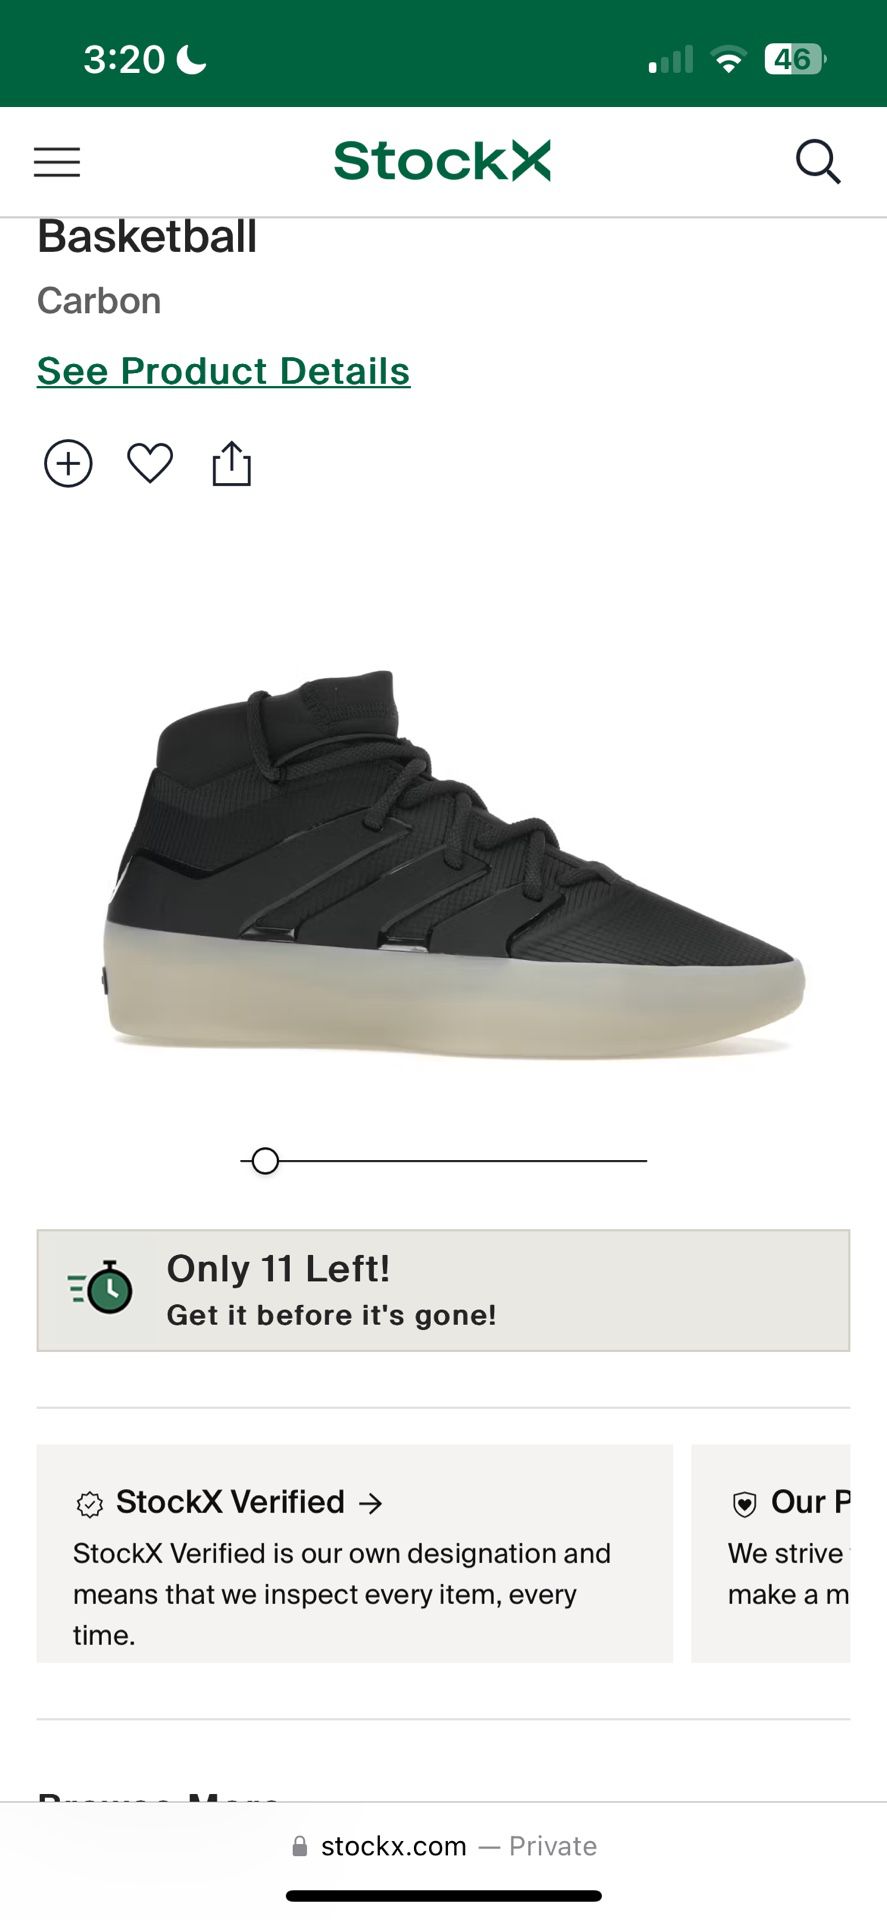 Adidas Fear of God Basketball Shoes (UW CFP Gift)